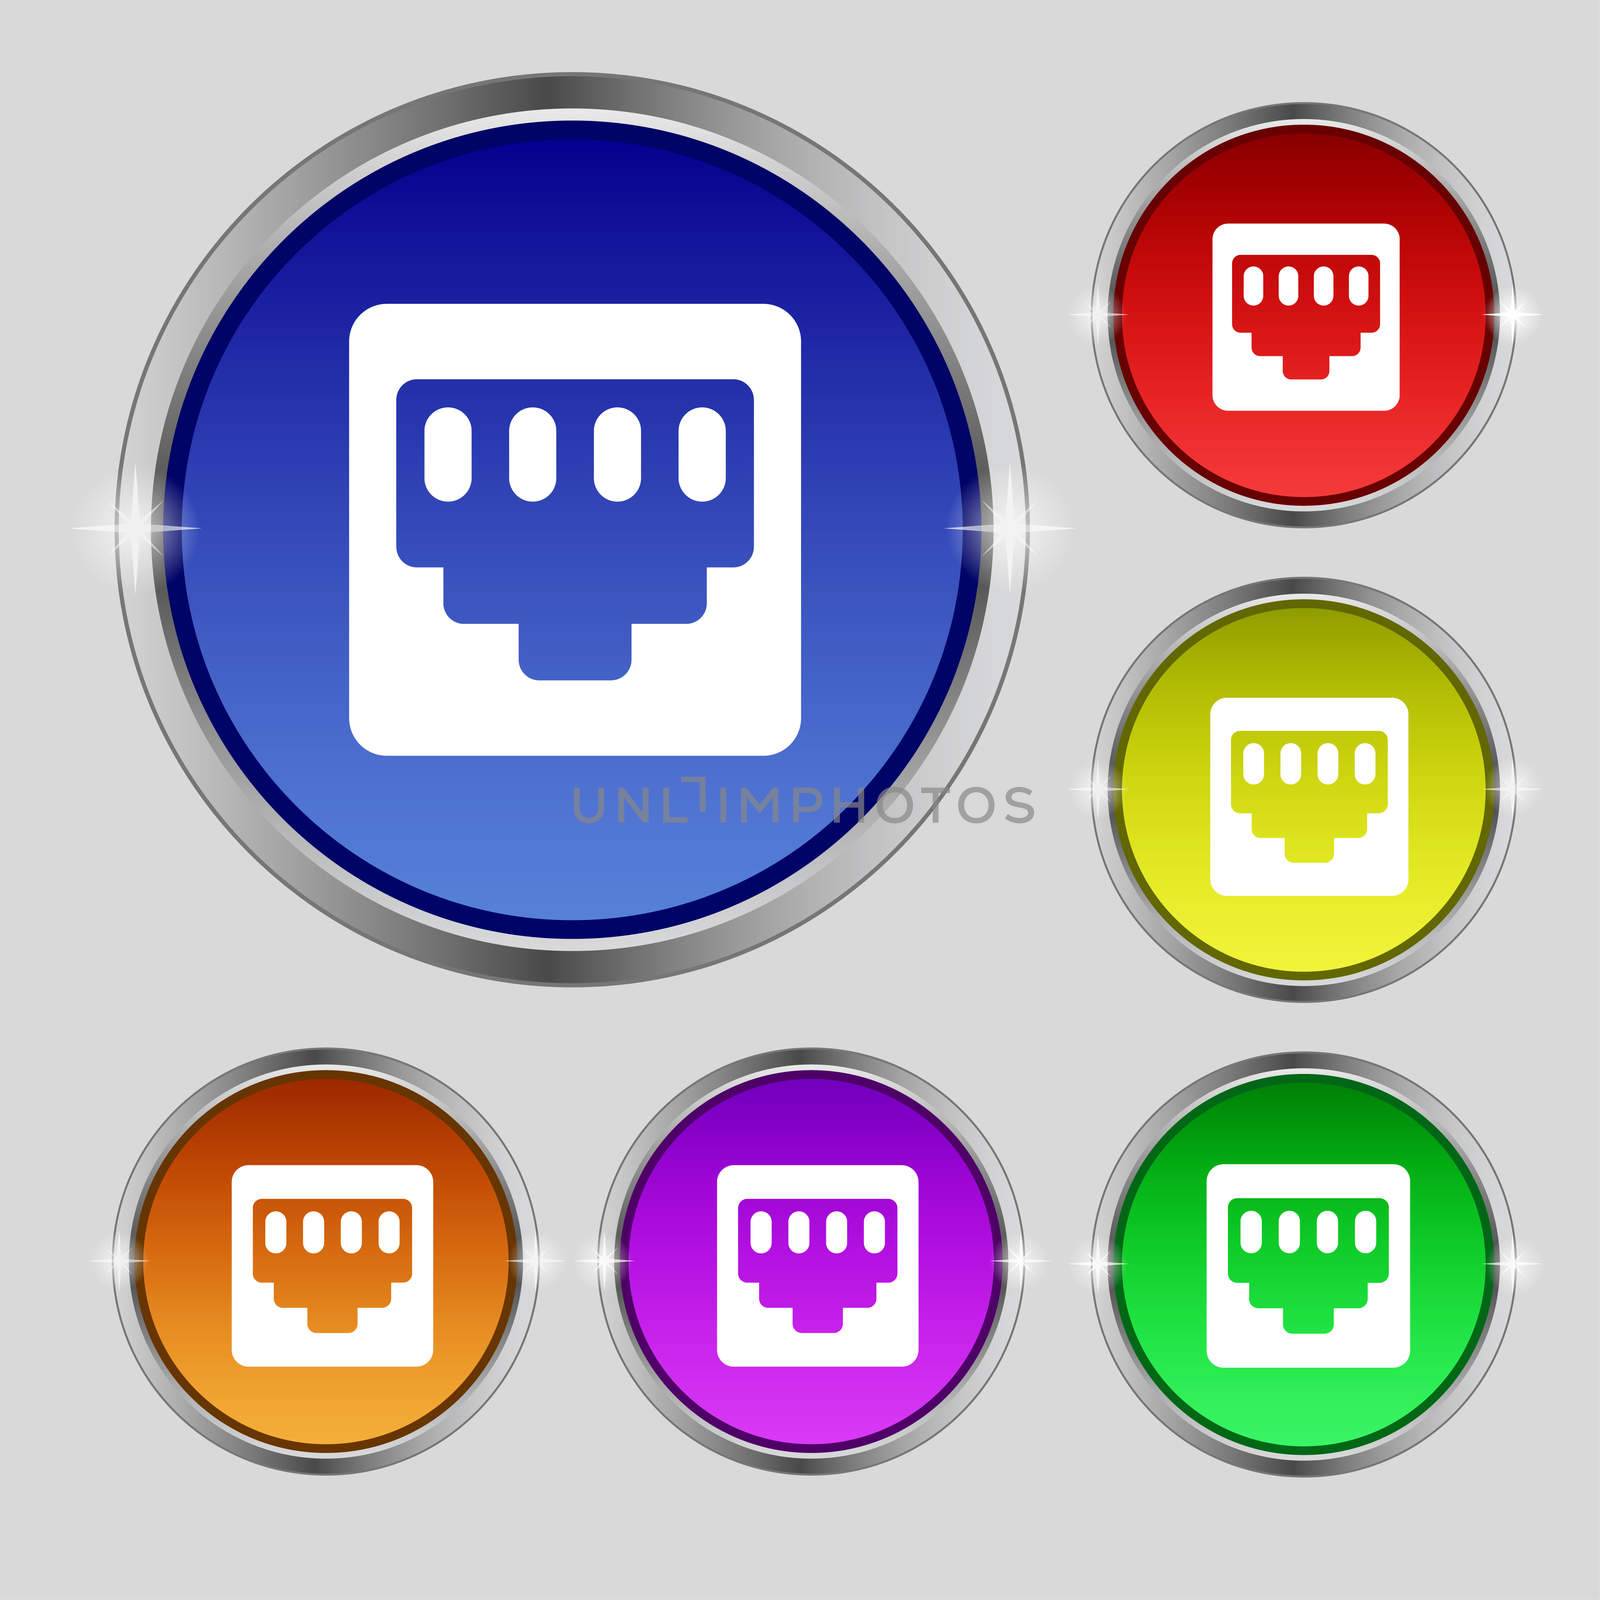 cable rj45, Patch Cord icon sign. Round symbol on bright colourful buttons.  by serhii_lohvyniuk